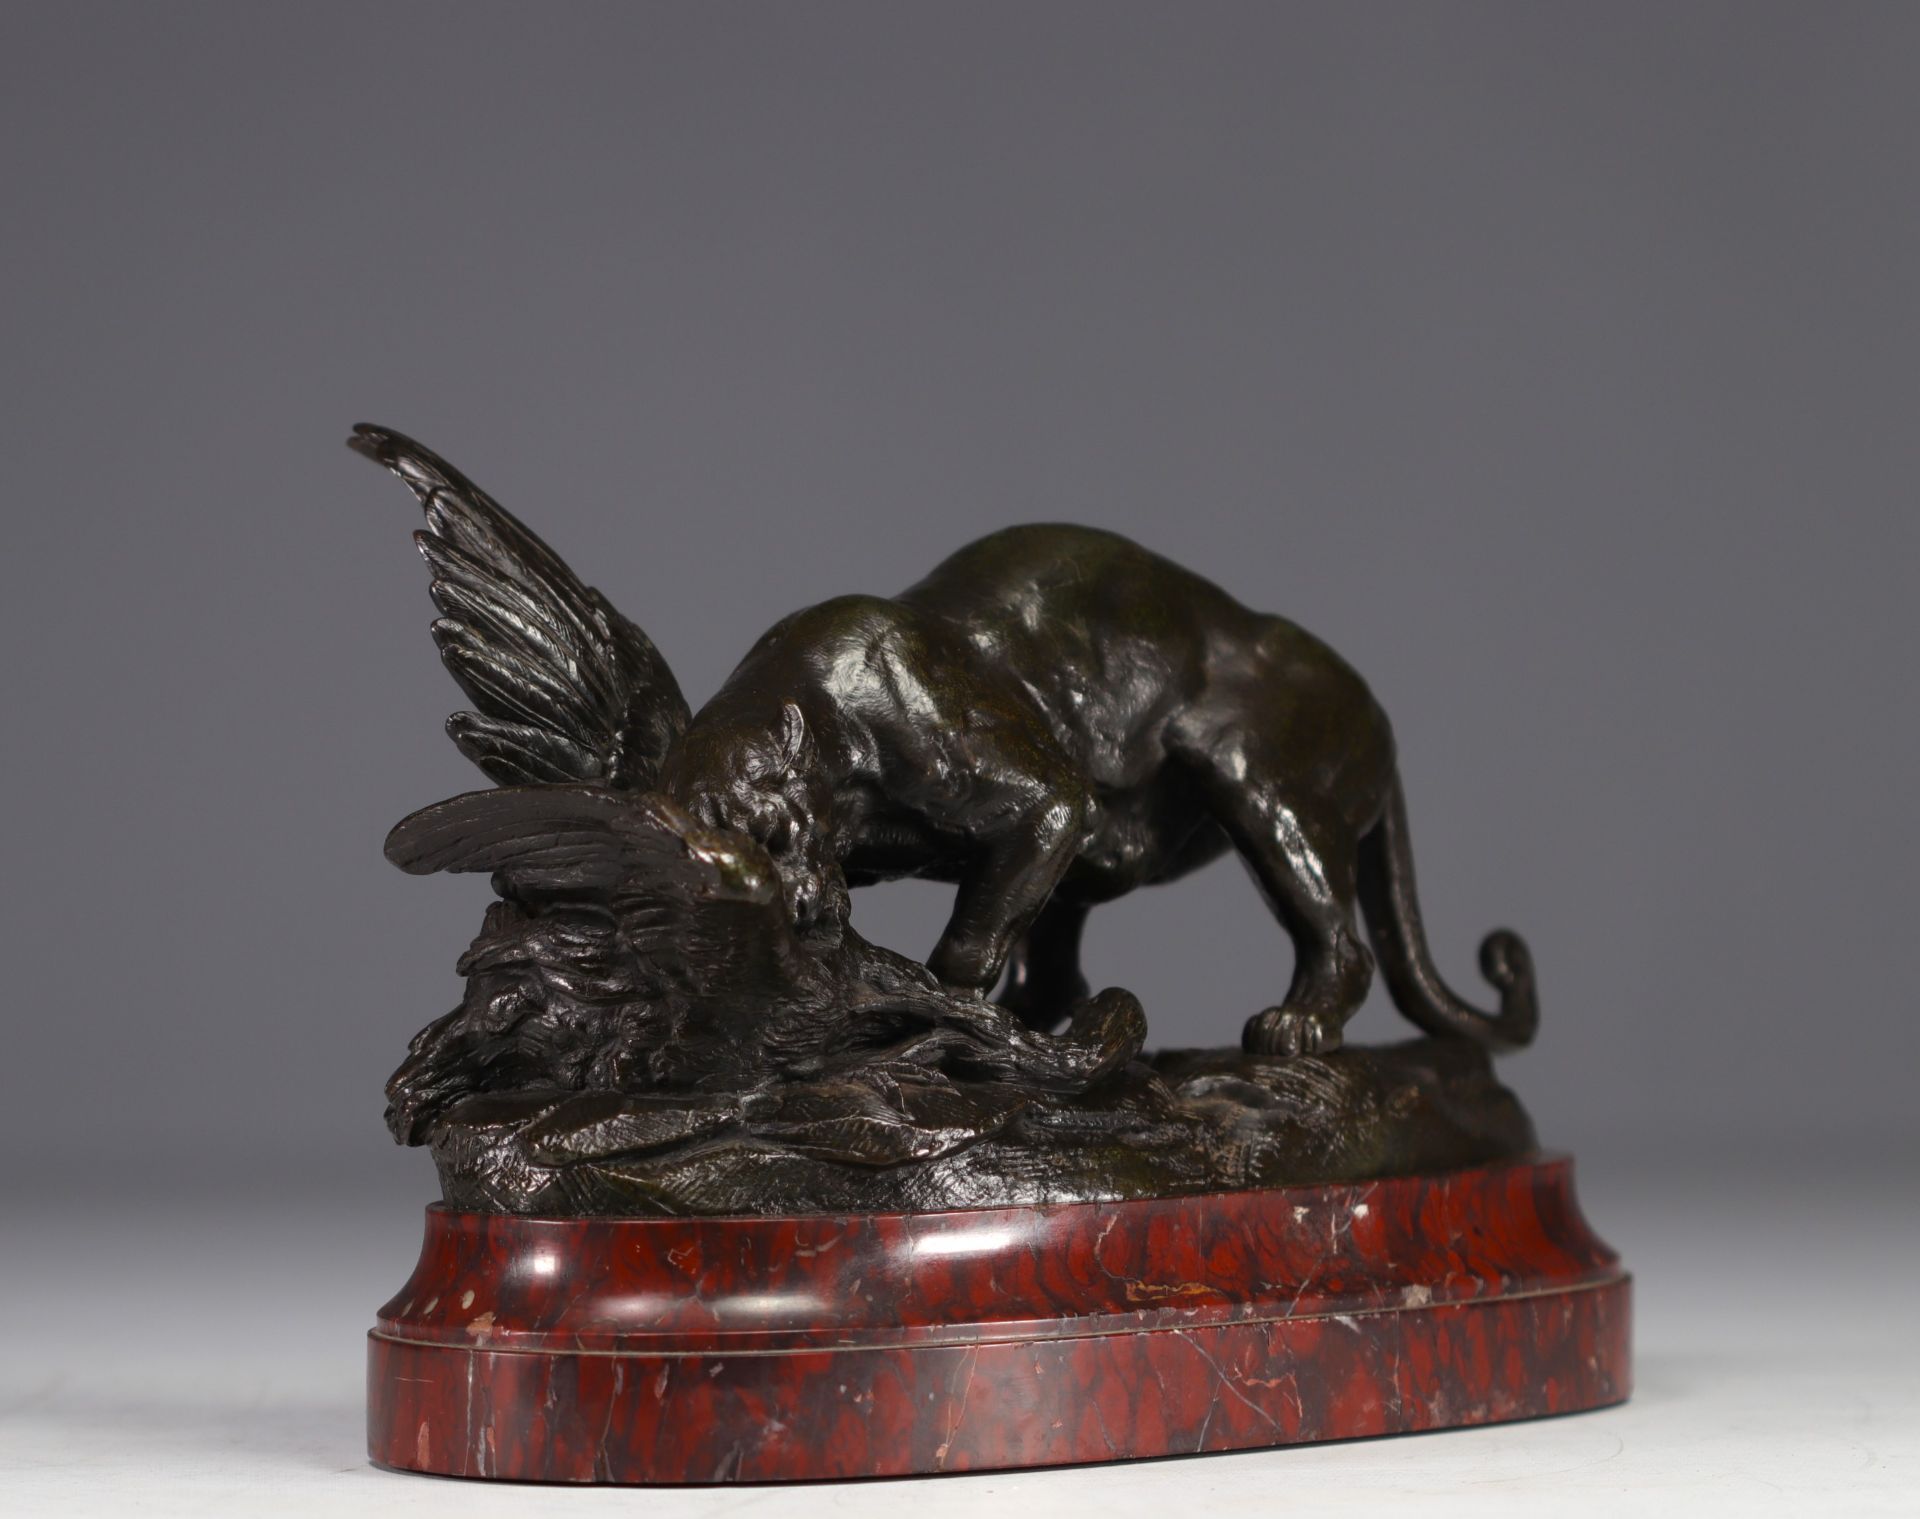 Paul Edouard DELABRIERRE (1829-1910) "Panther devouring a pelican" Bronze sculpture. - Image 2 of 4